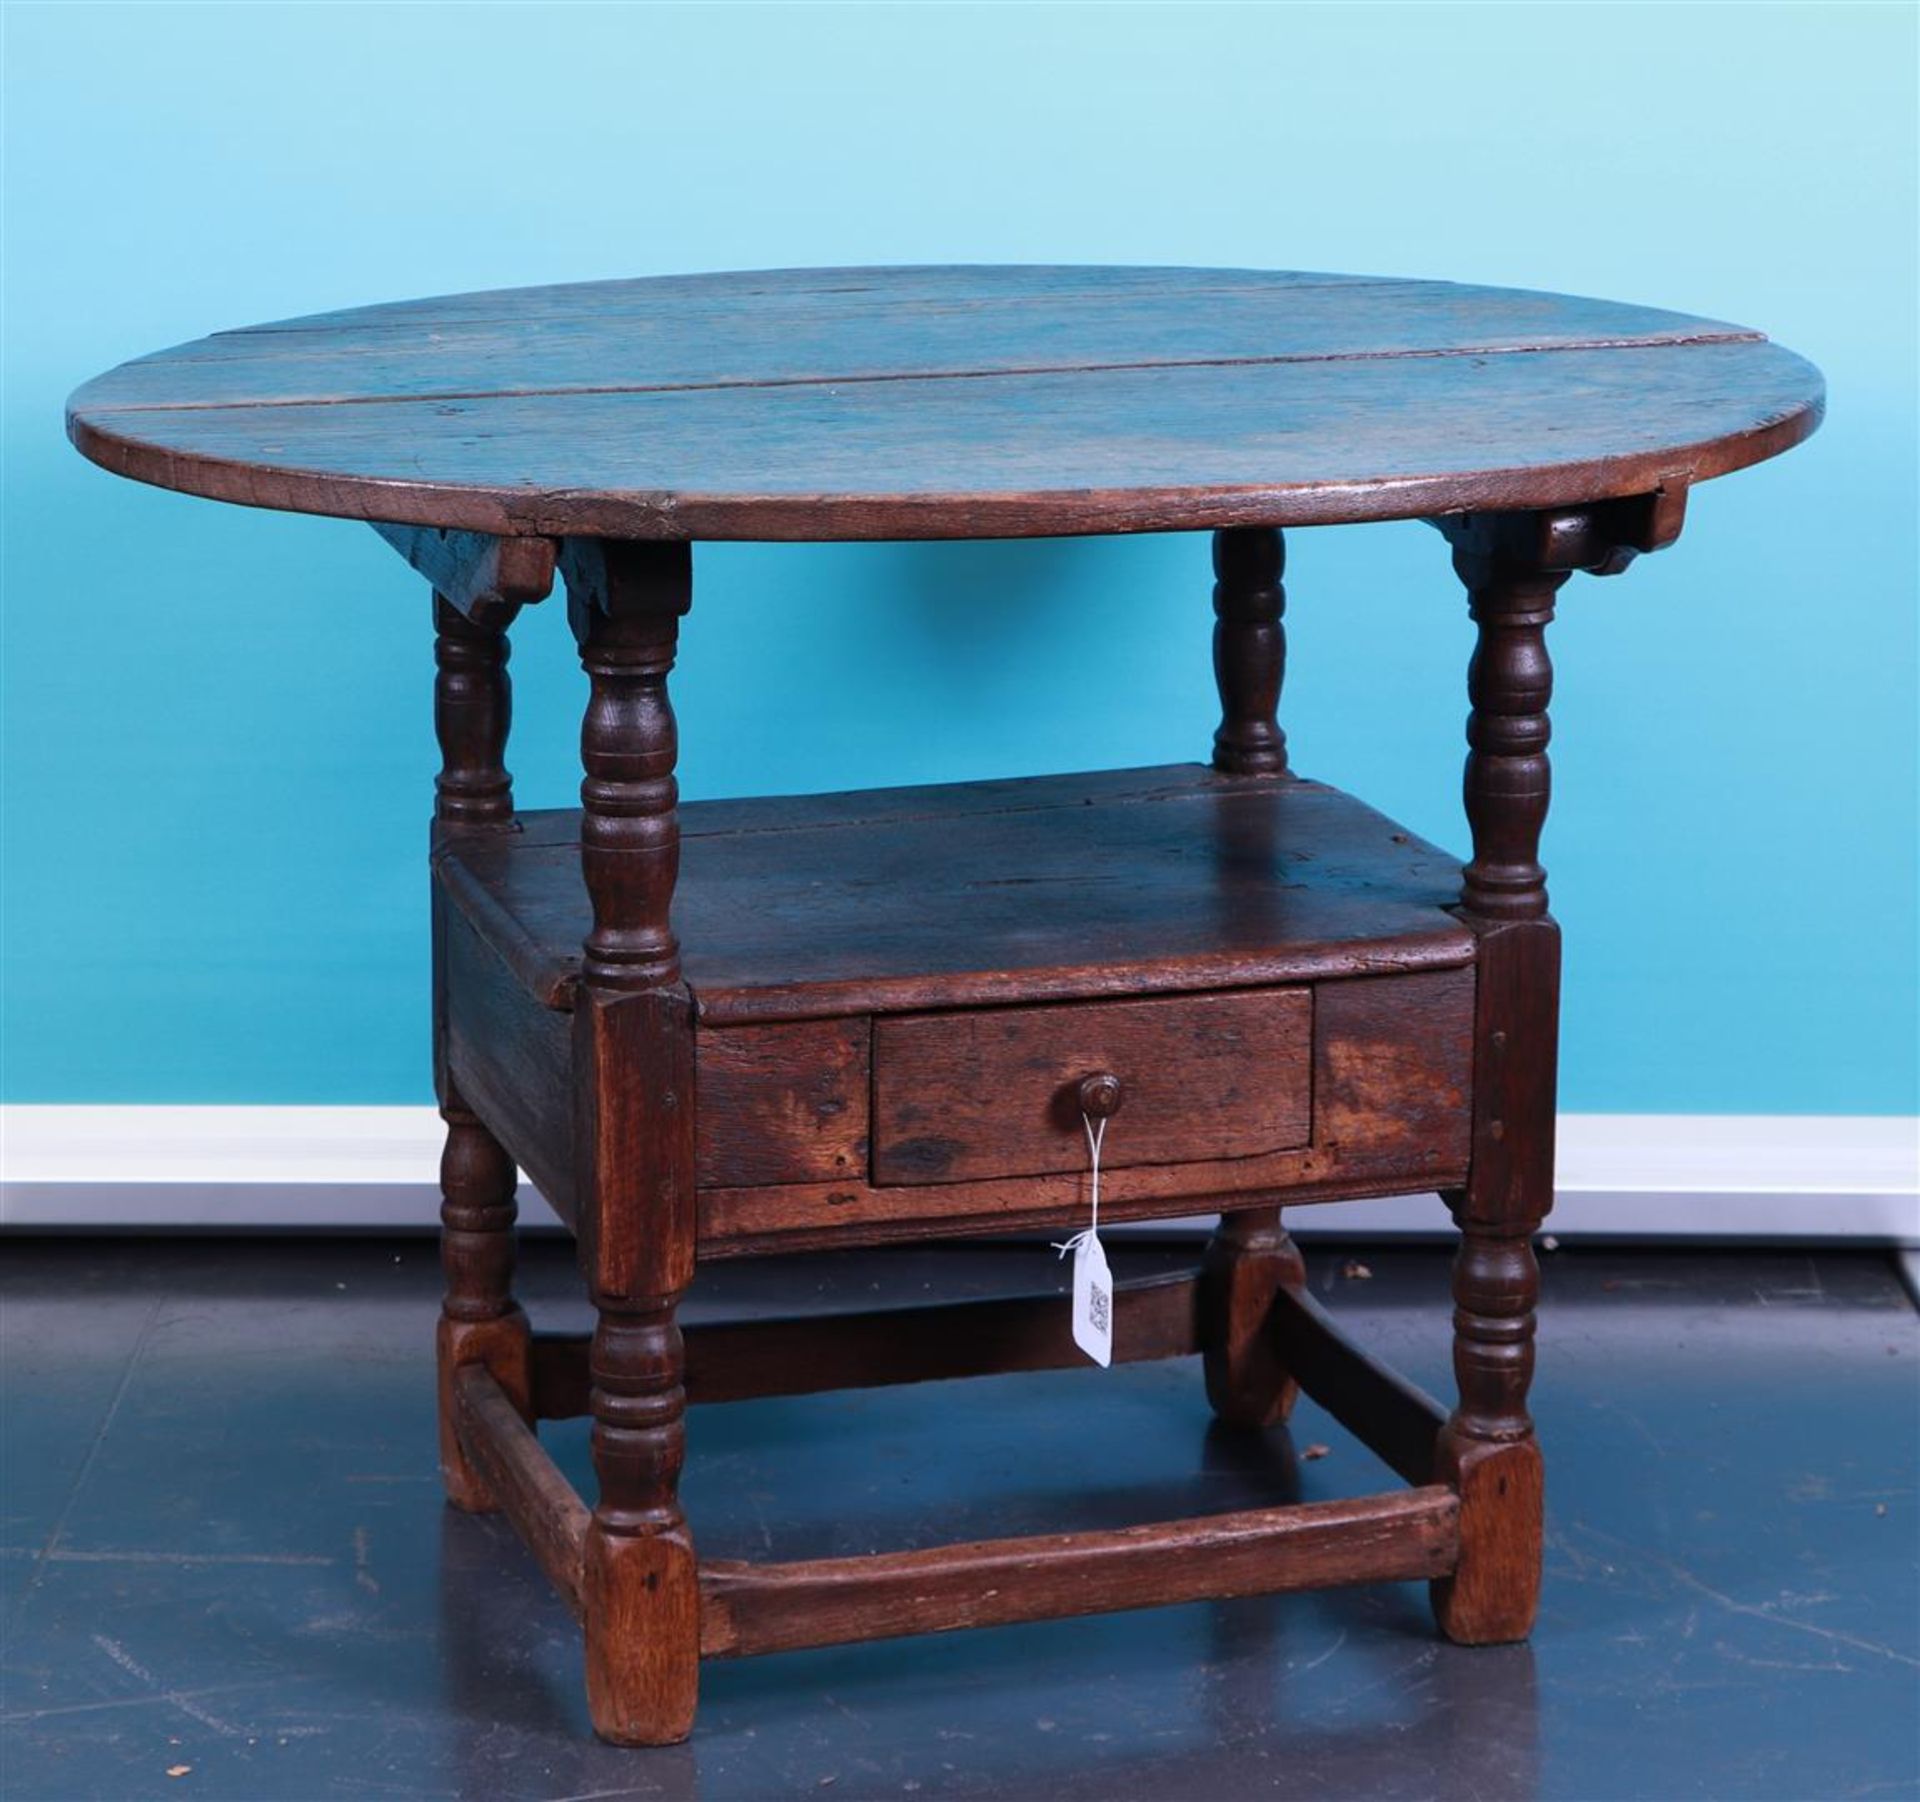 An oak chair/table with drawer under the seat, Holland 18th century.
